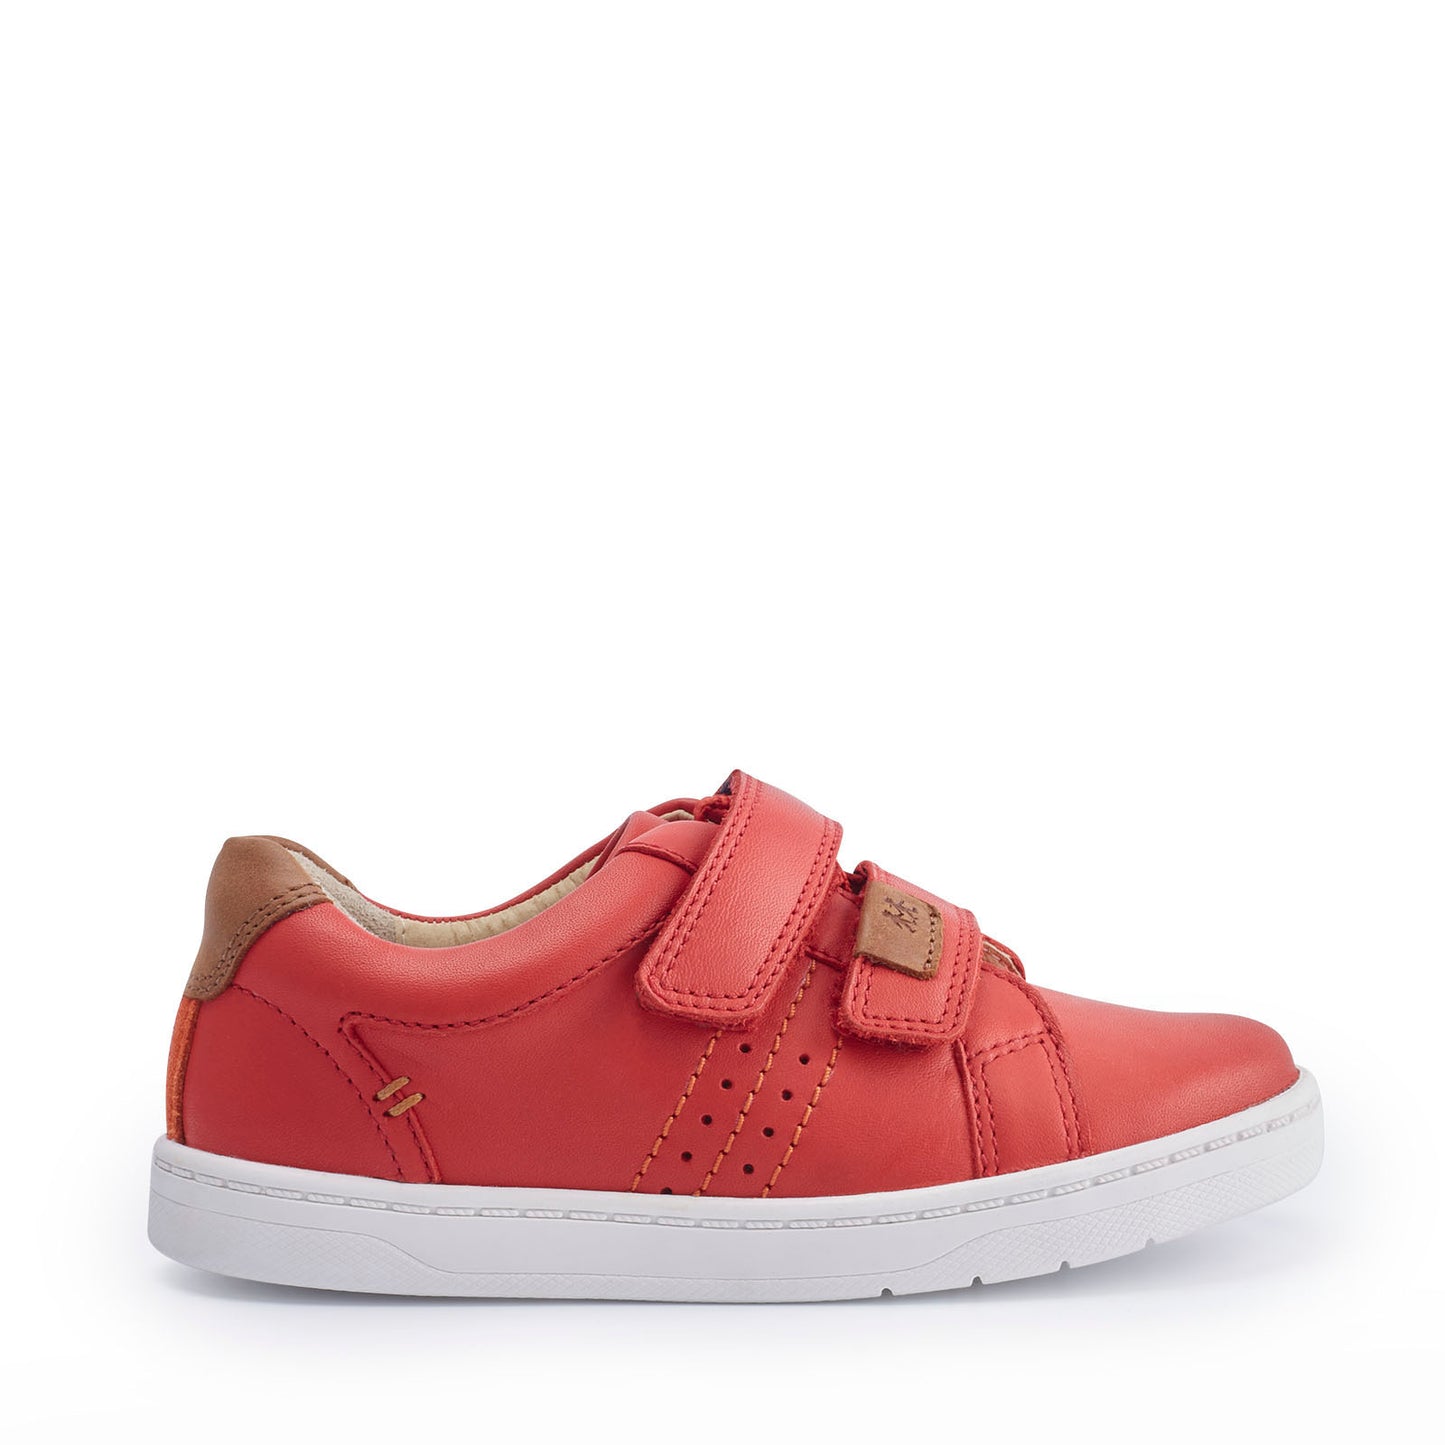 A boys casual shoe by Start Rite, style Explore, in red leather with double velcro fastening. Right side view.